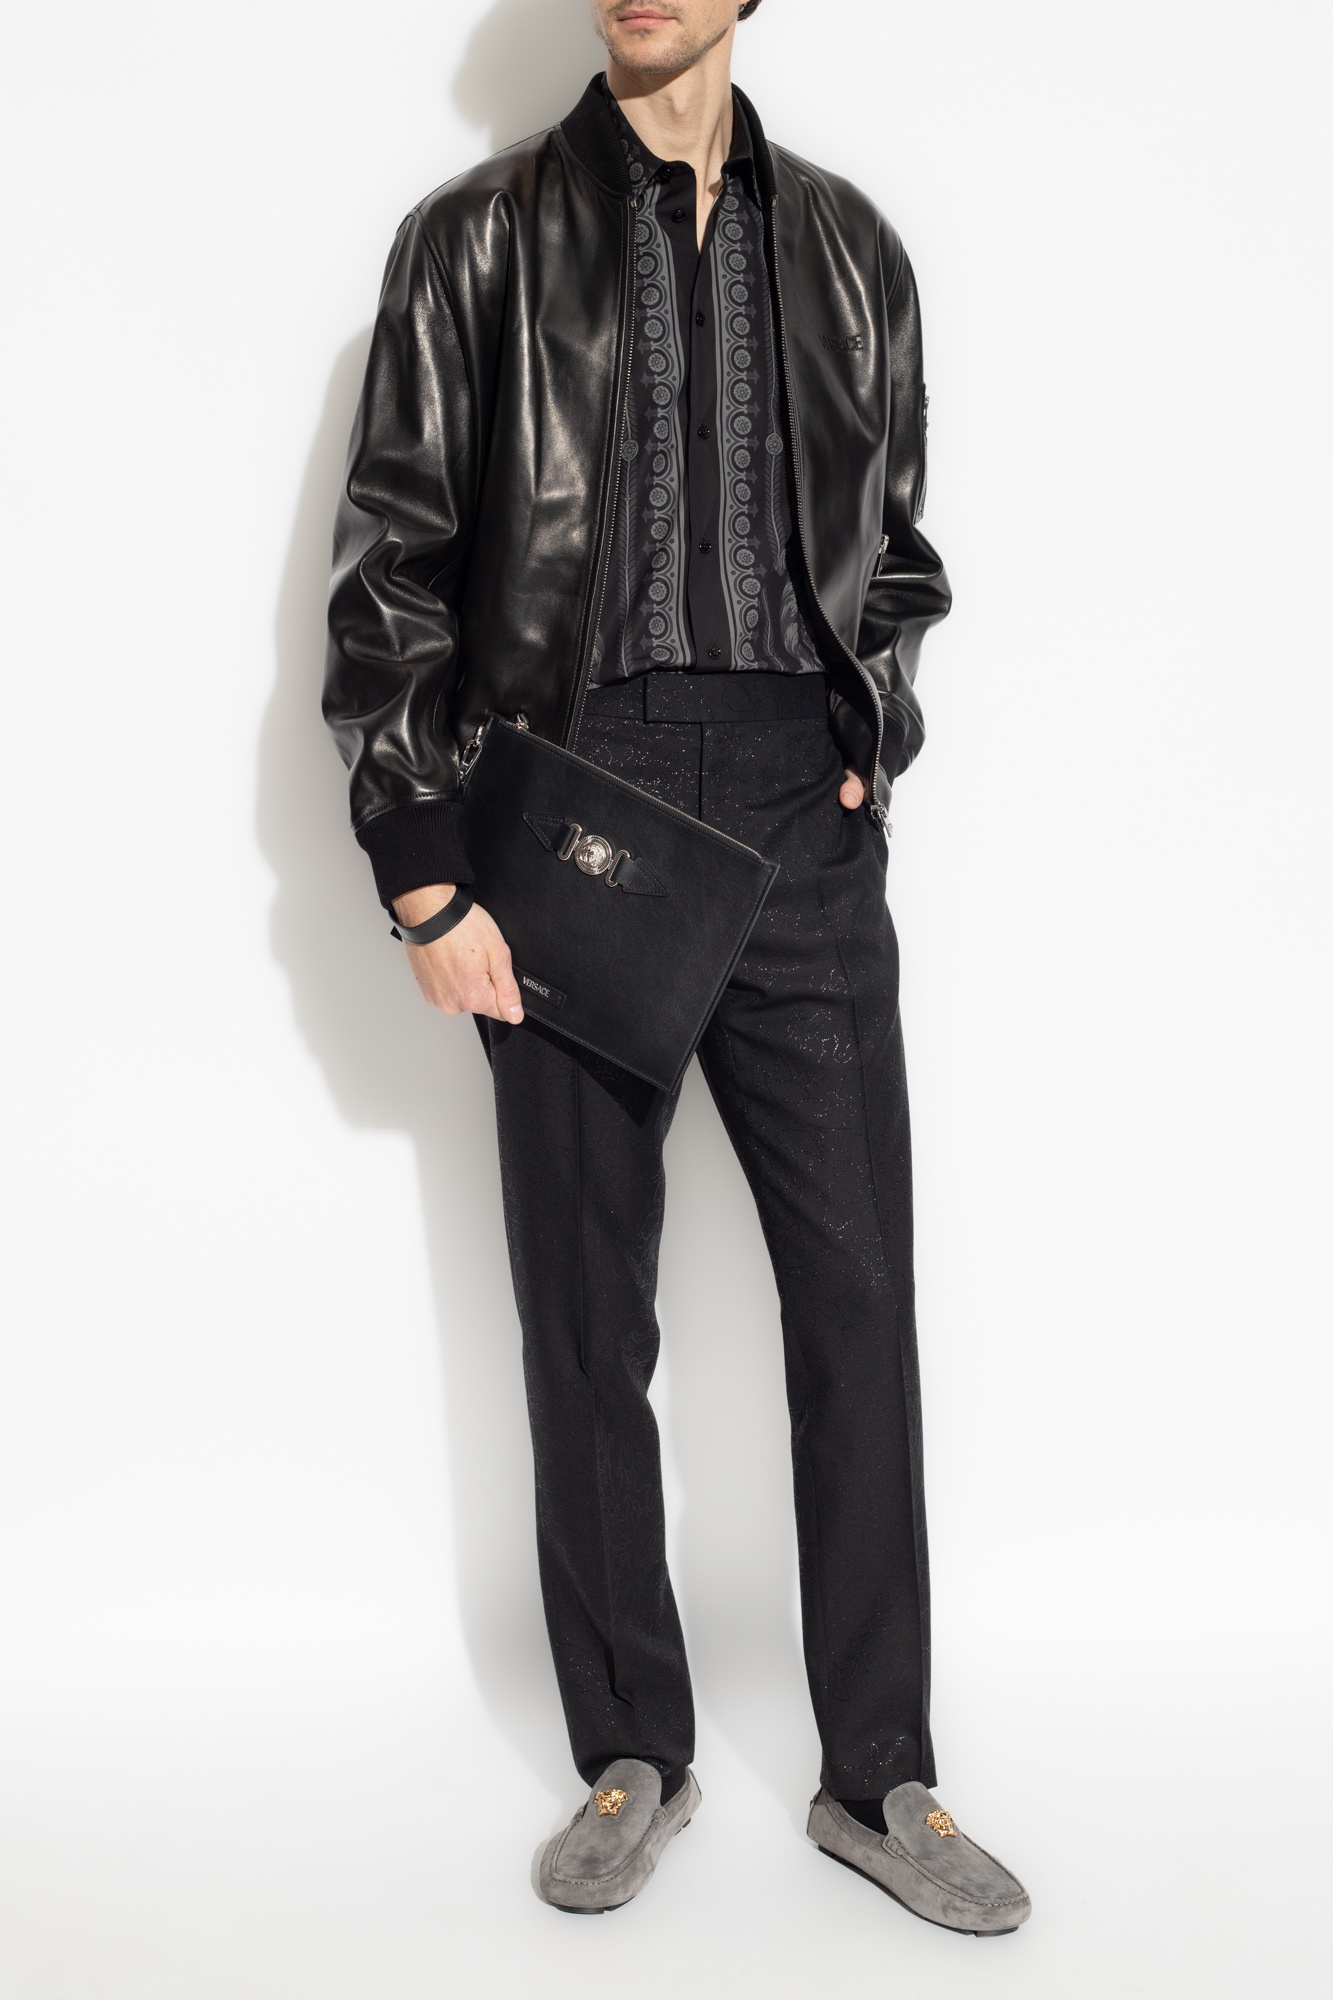 Versace Wool PAPER trousers with lurex yarn